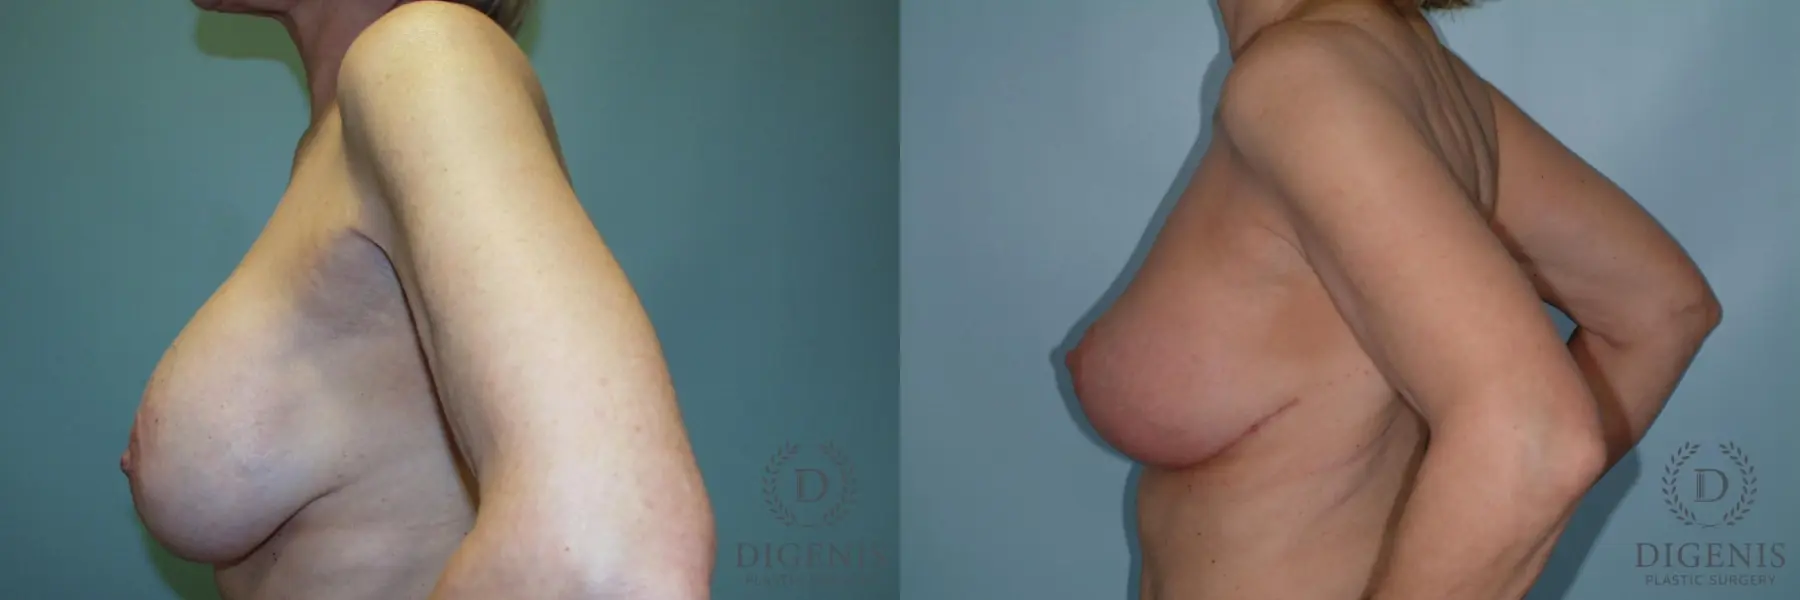 Breast Lift With Implants: Patient 6 - Before and After 5